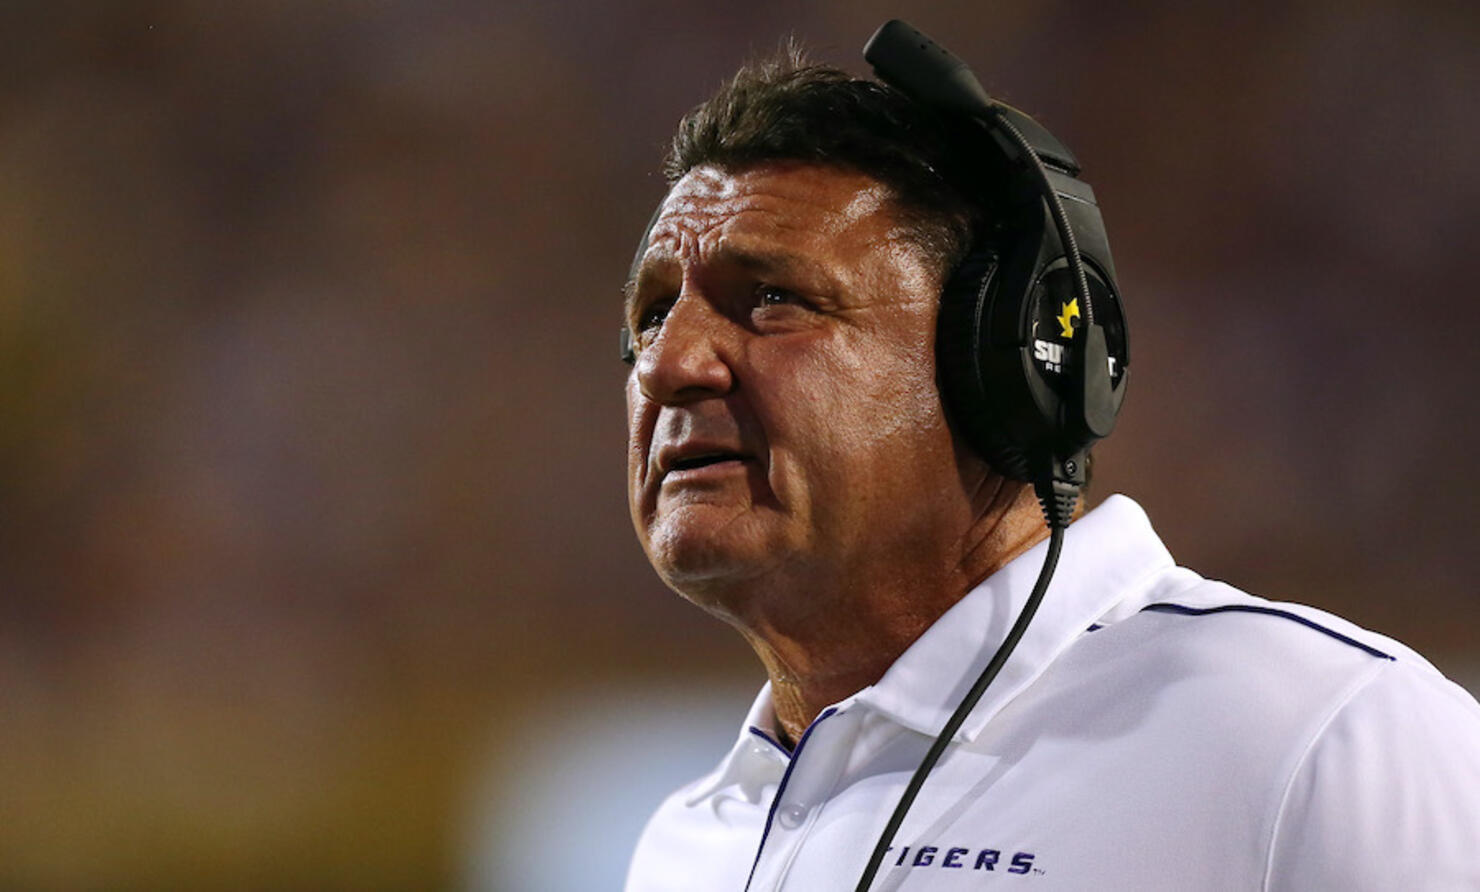 Controversial Photo Of LSU Coach Ed Orgeron Leaked, Goes Viral